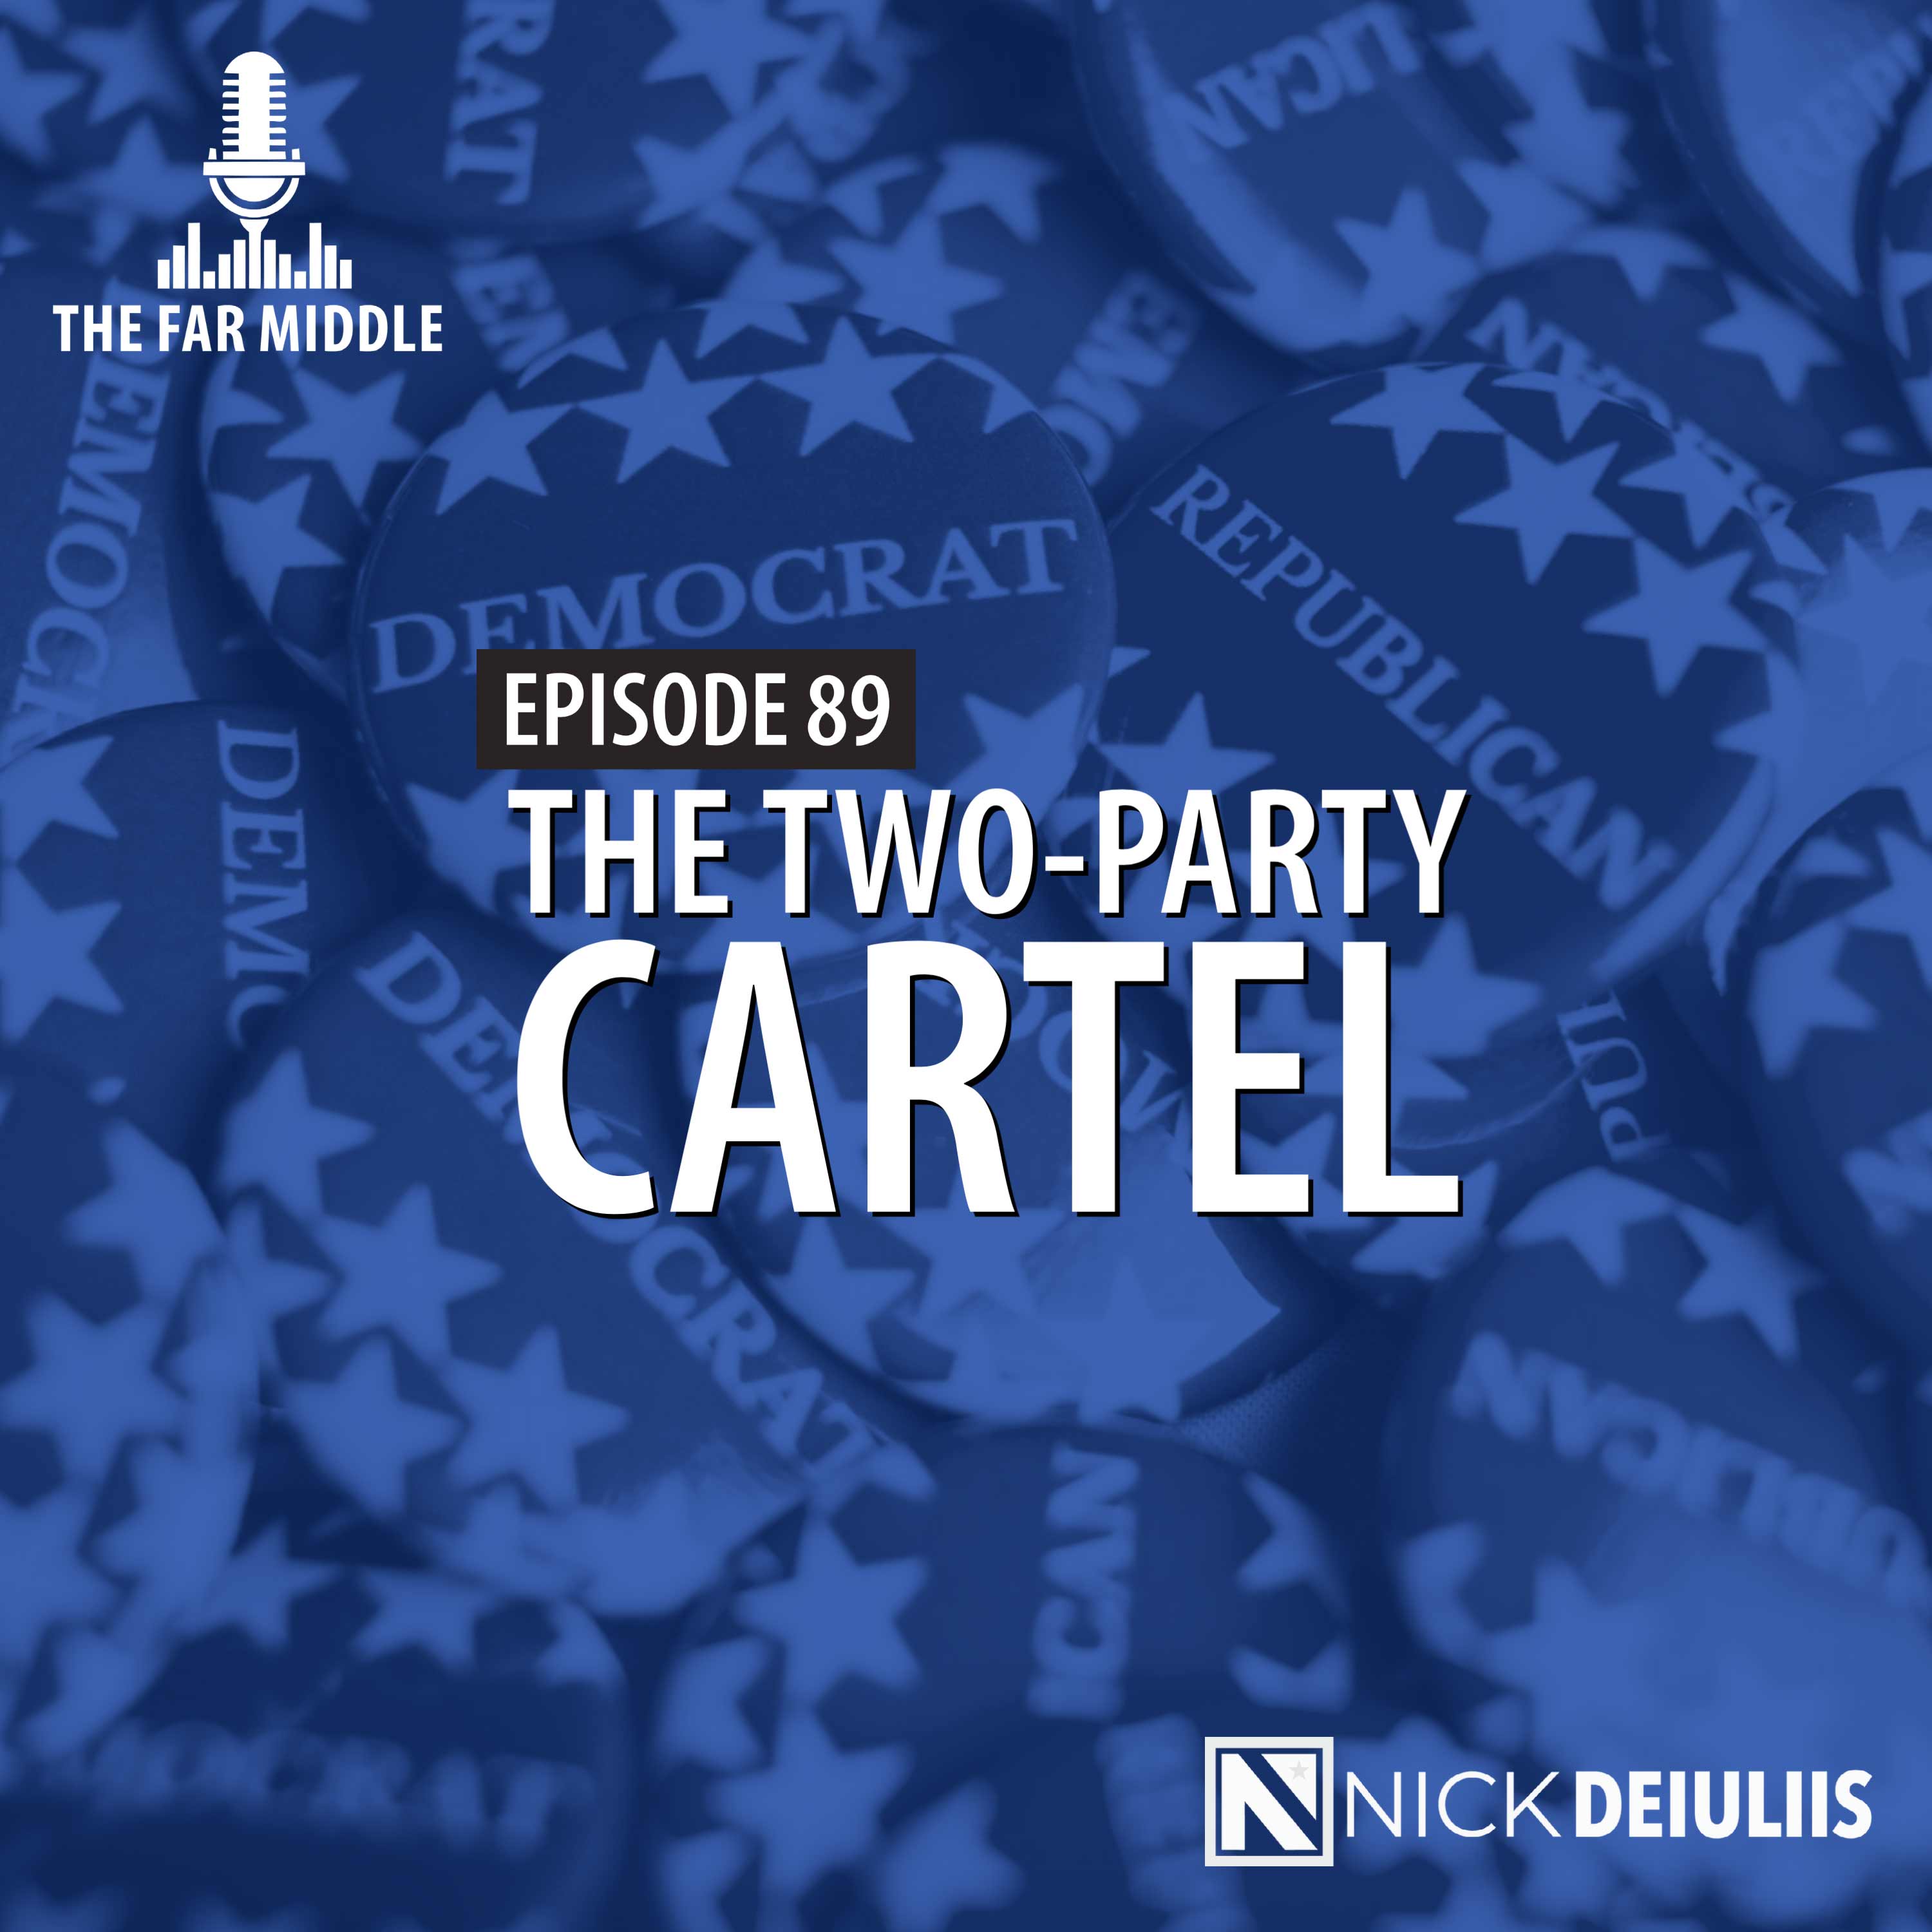 The Two-Party Cartel